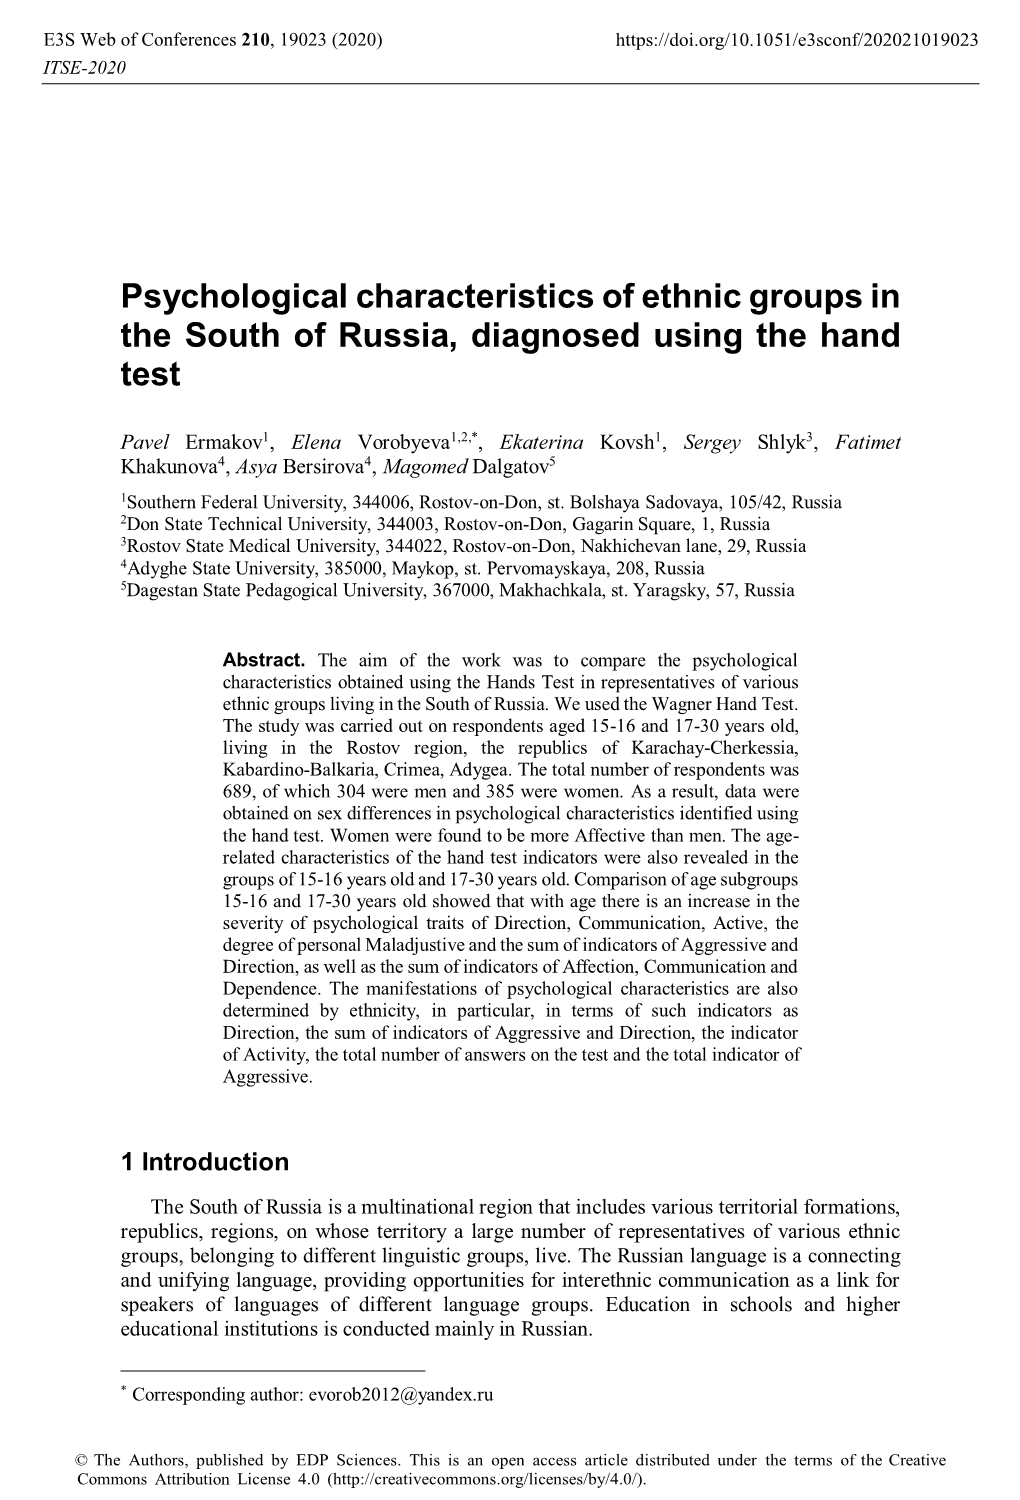 Psychological Characteristics of Ethnic Groups in the South of Russia, Diagnosed Using the Hand Test